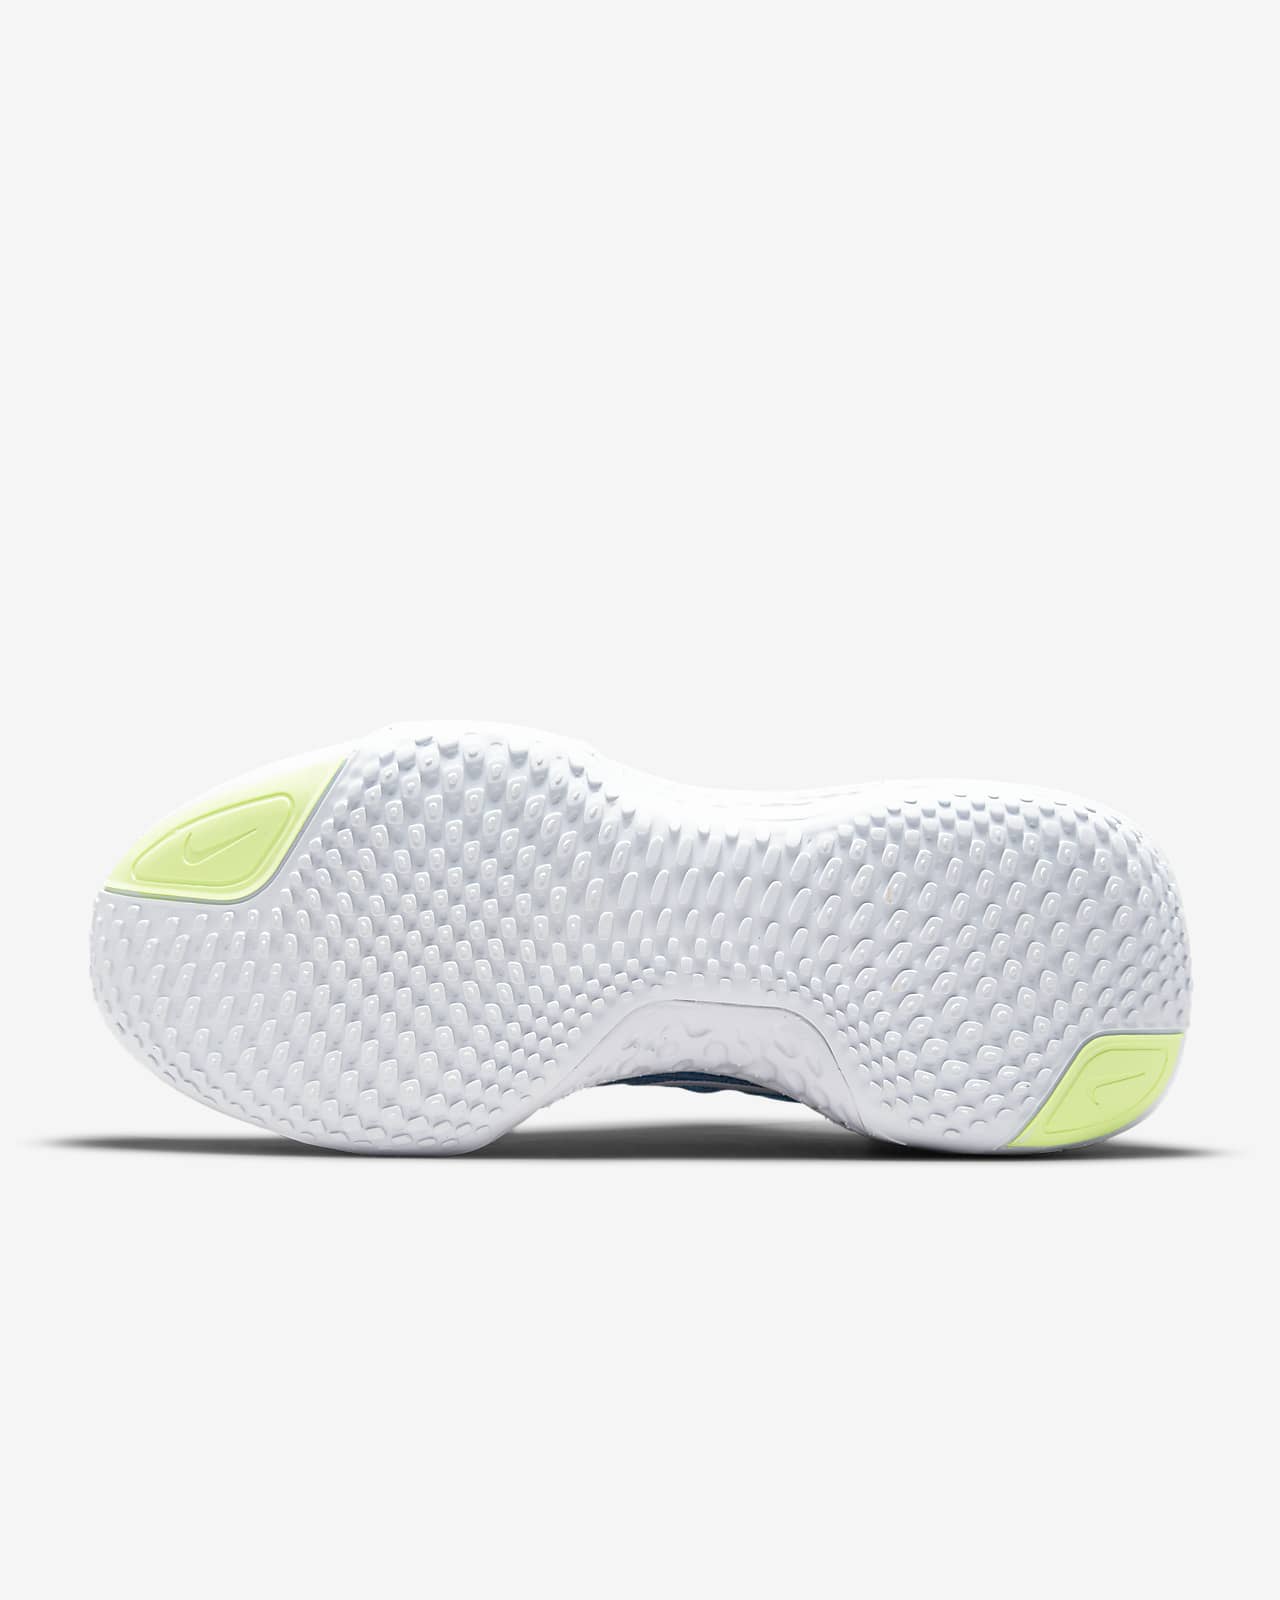 nike flyknit men's shoes price philippines